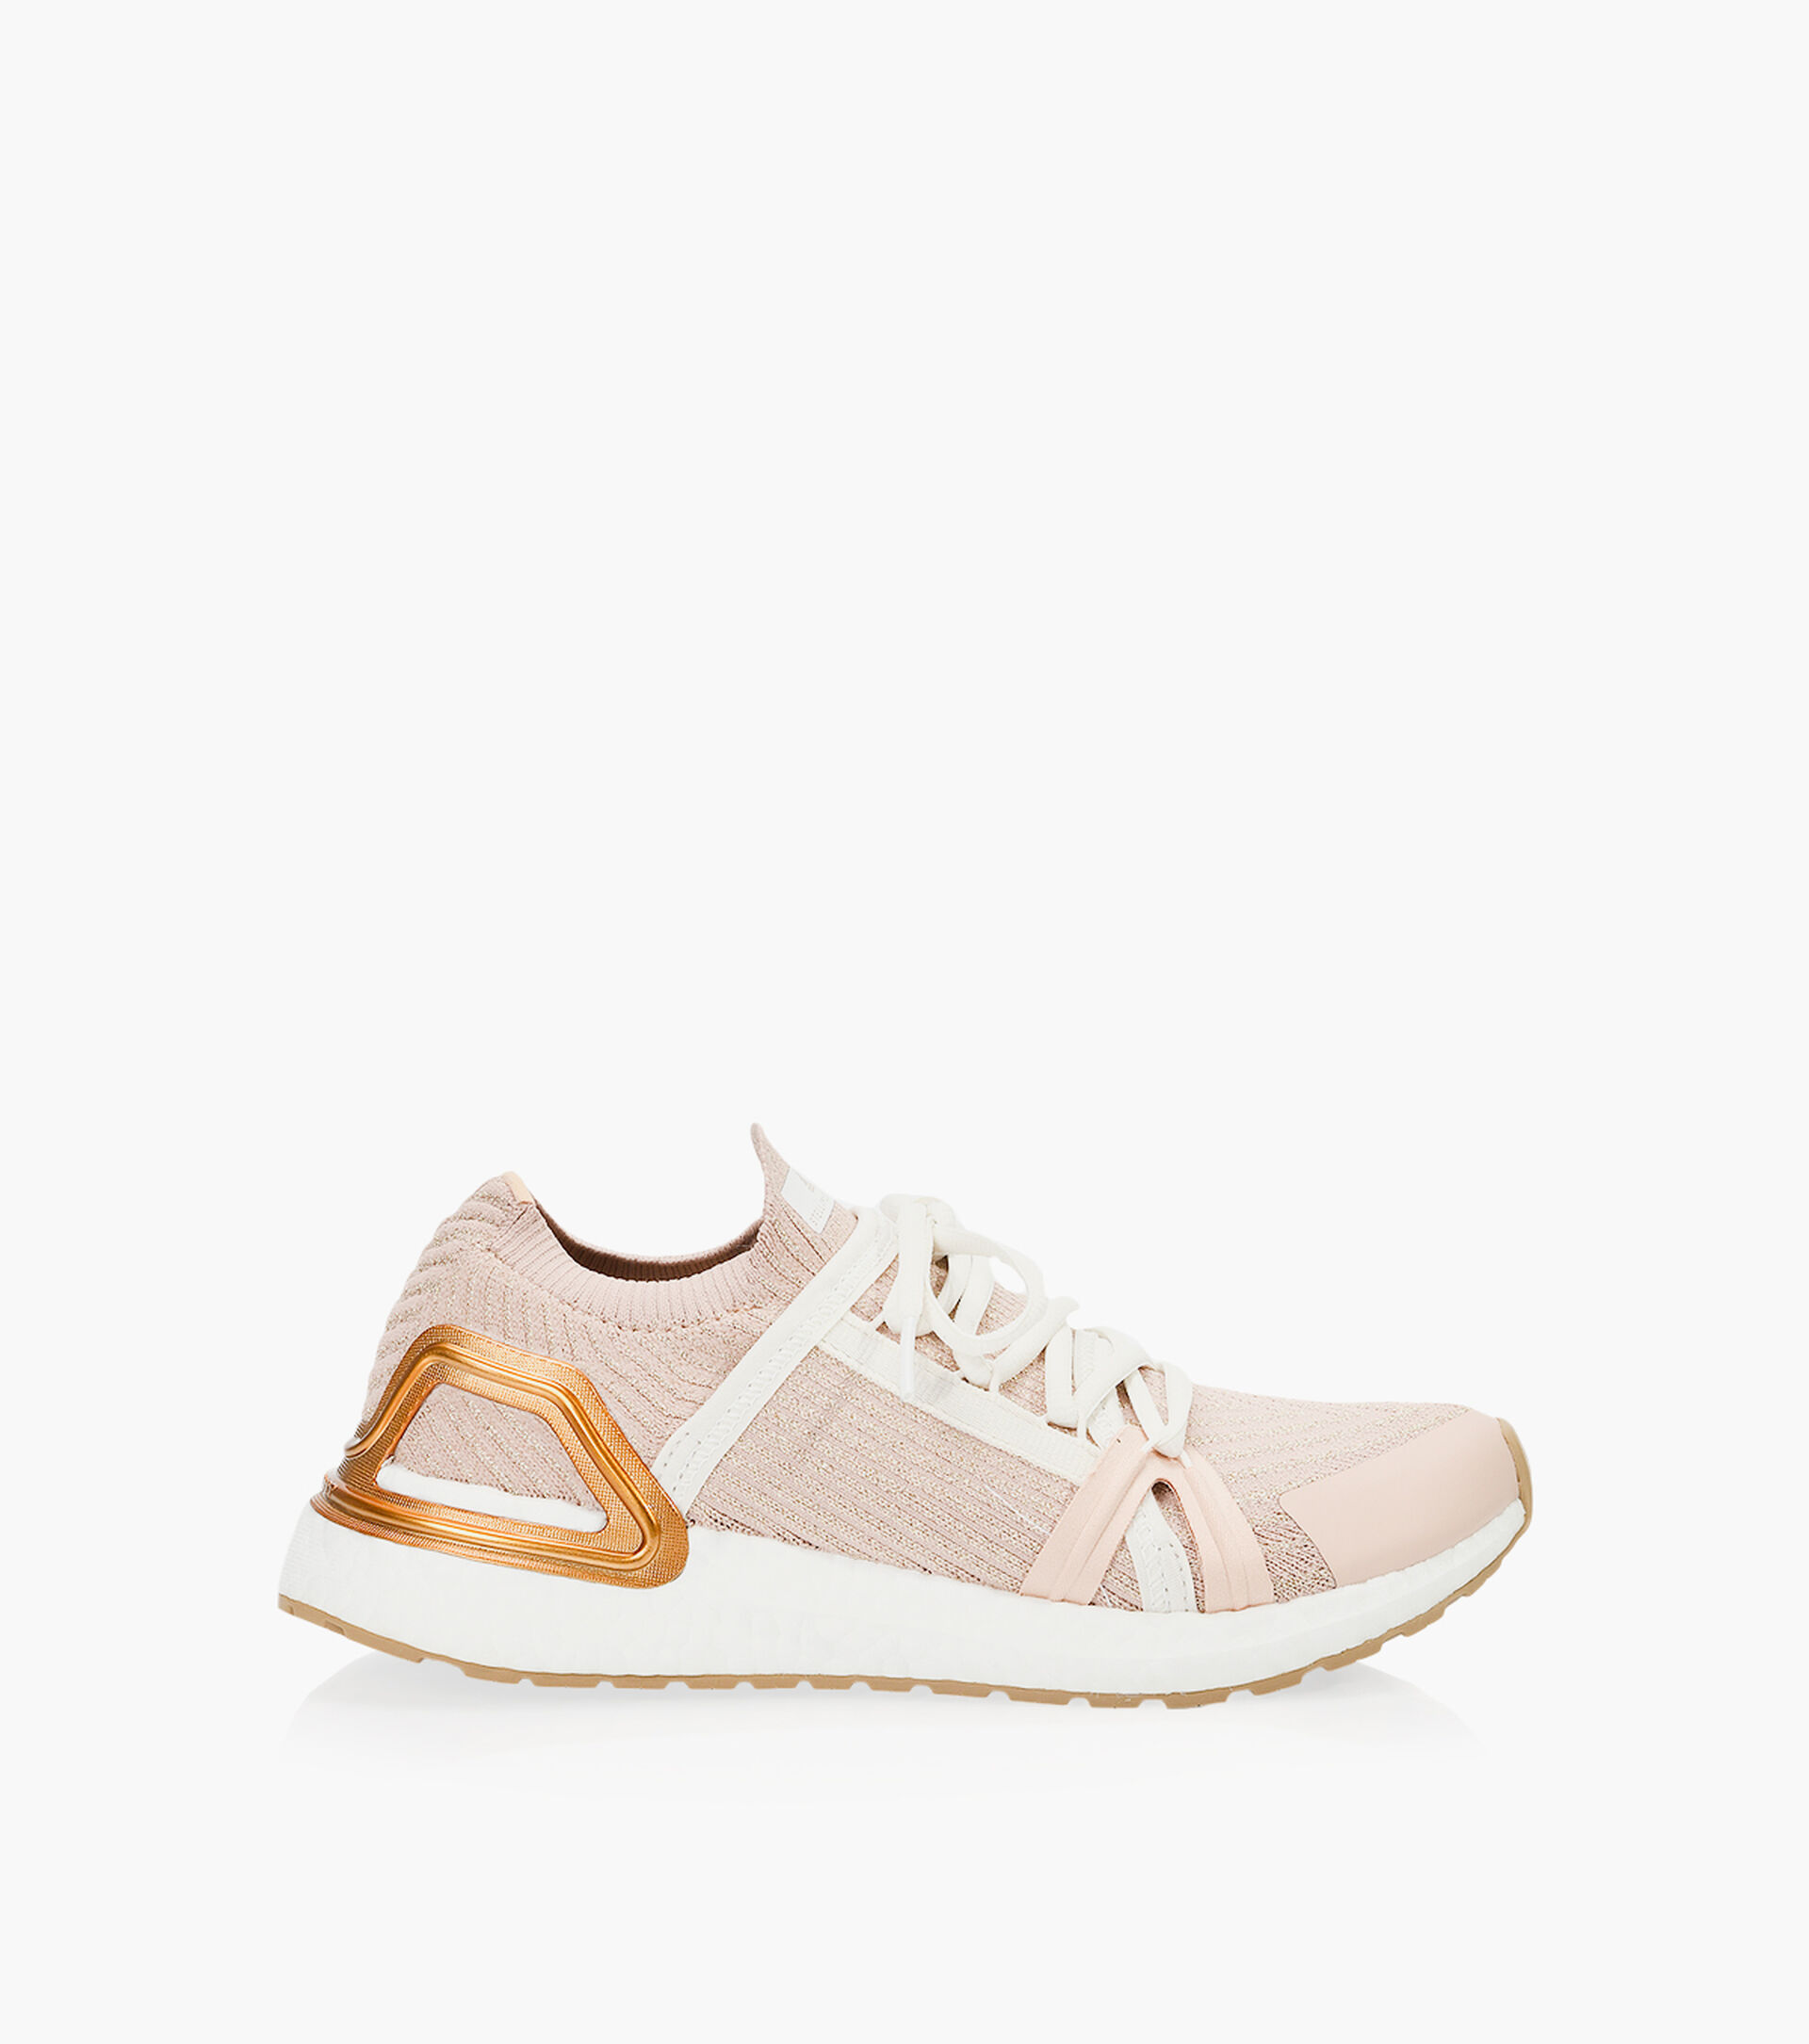 STELLA MCCARTNEY ADIDAS BY STELLA MCCARTNEY ULTRABOOST 2.0 - Rose Gold  Leather | Browns Shoes